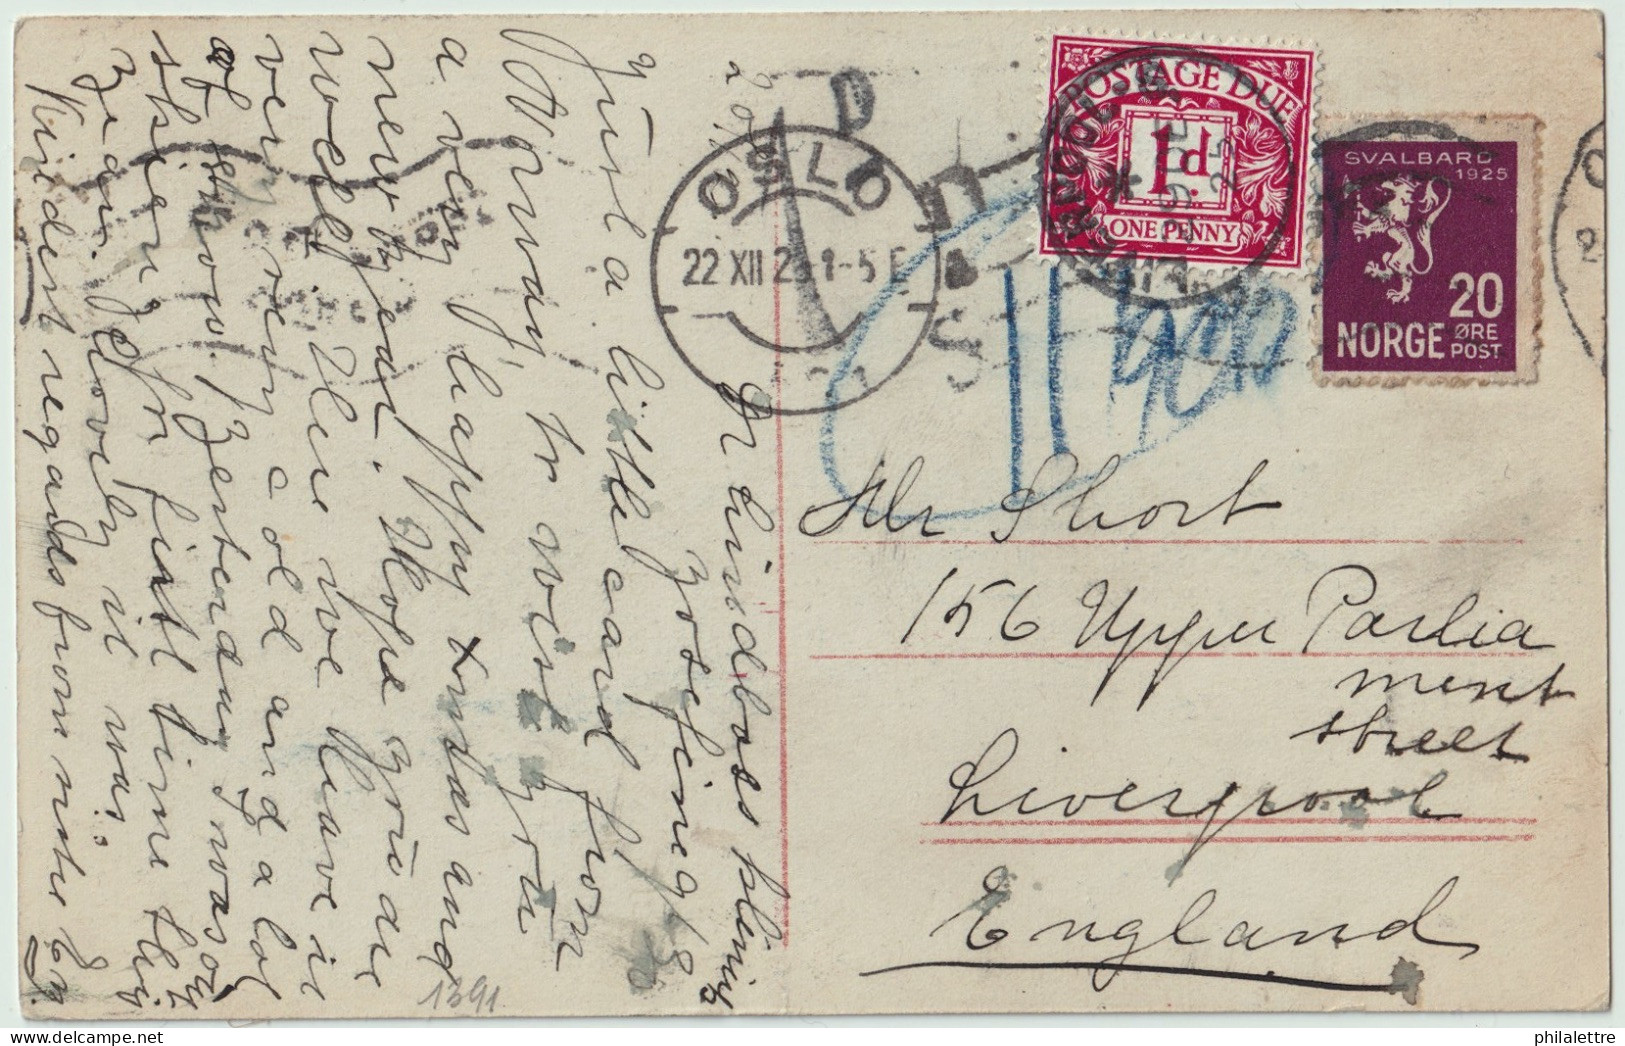 ROYAUME-UNI / UK - SG D11 On 1925 DENMARK To GB Underpaid Postage Due OSLO PPC To LIVERPOOL Franked 20 ör SVALBARD Issue - Tasse